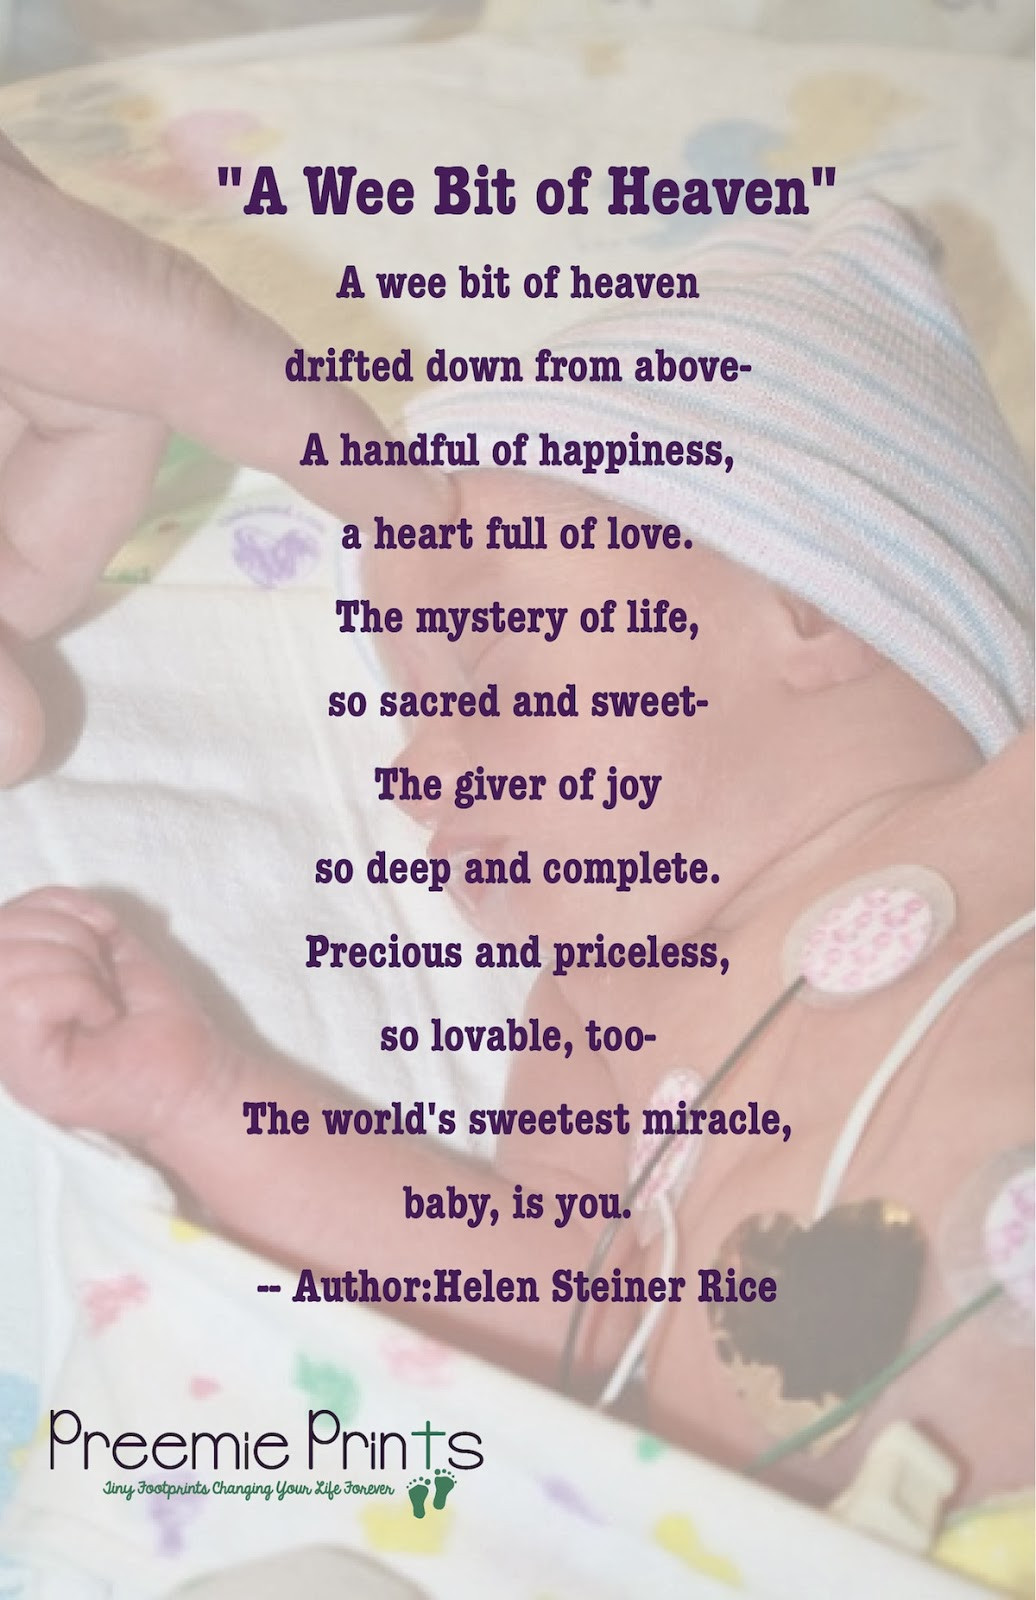 Quotes For New Parents Of A Baby Boy
 Preemie Prints Information Blog Poems Prayers & Quotes